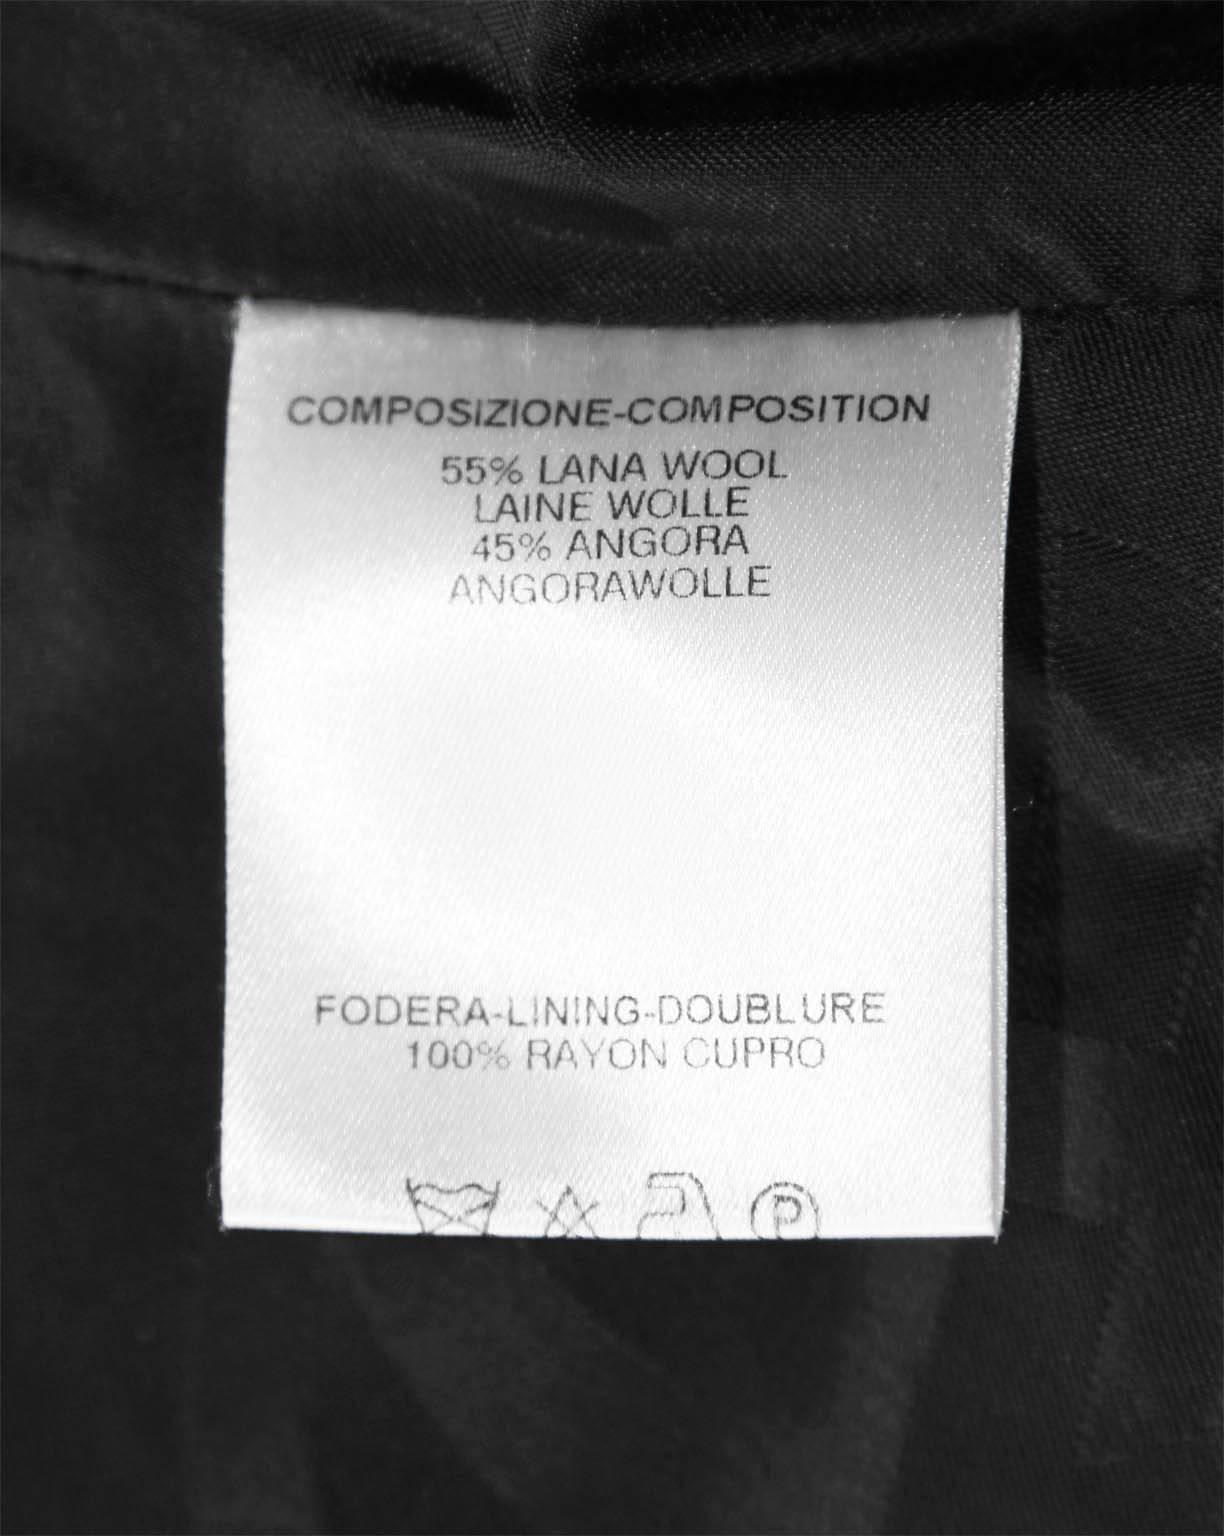 The Most Heavenly Tom Ford Gucci FW 2003 Black Cashmere Corseted Runway Coat! 1